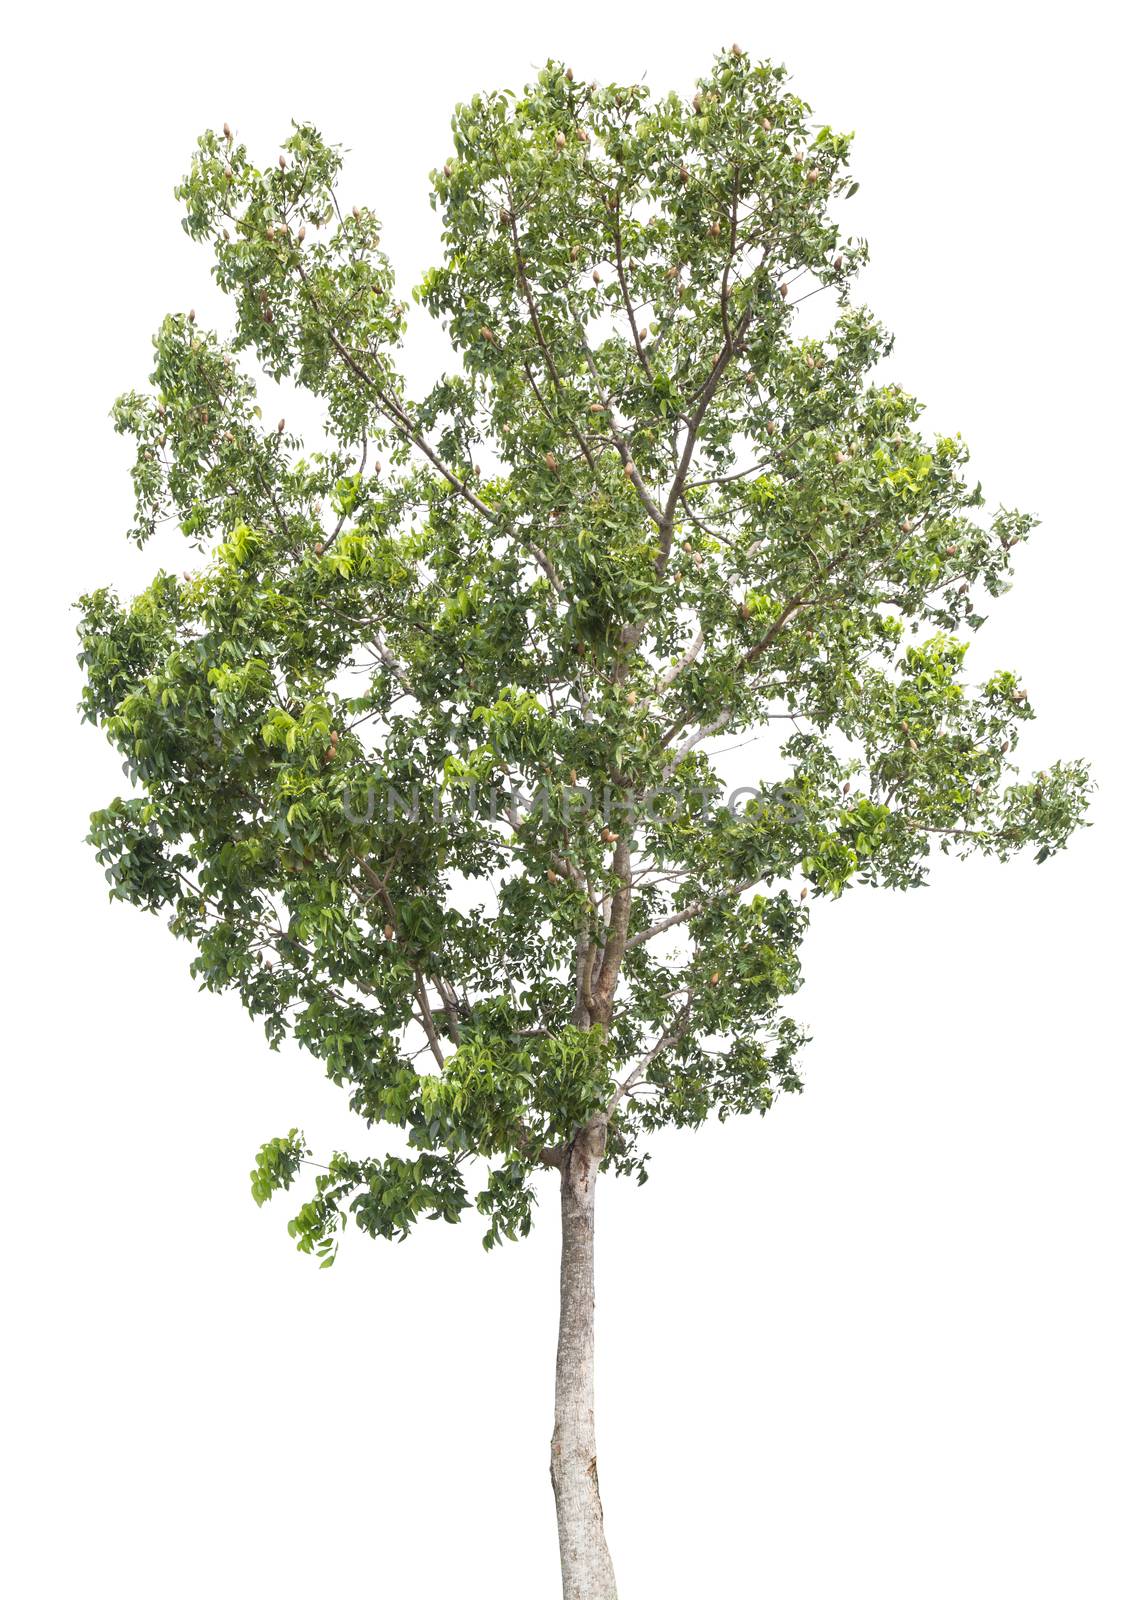 Beautiful green tree isolated on white background.